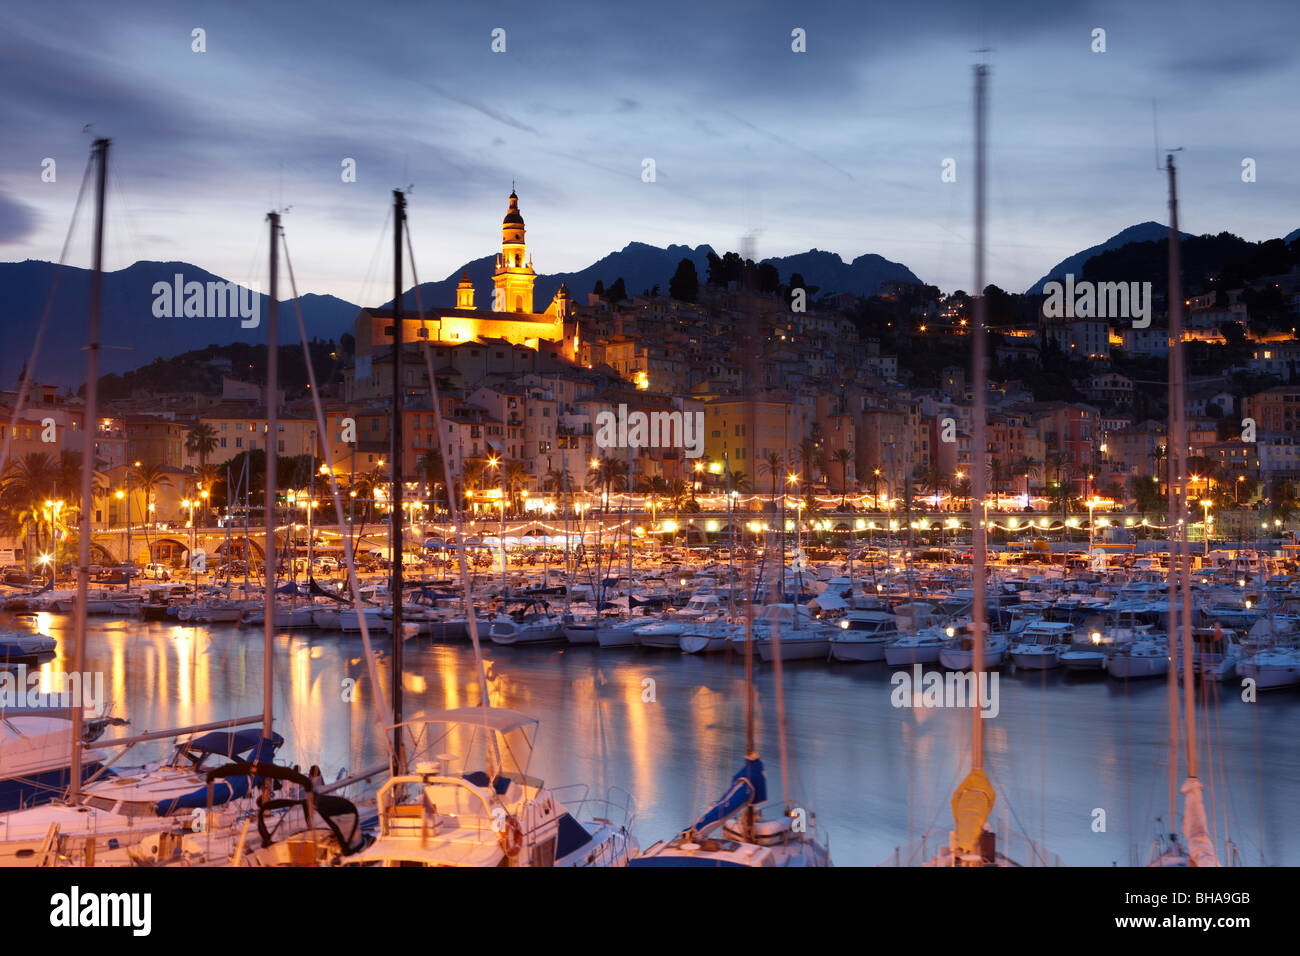 the harbour and Old Town of Menton at night, Cote d'Azur, Provence, France Stock Photo